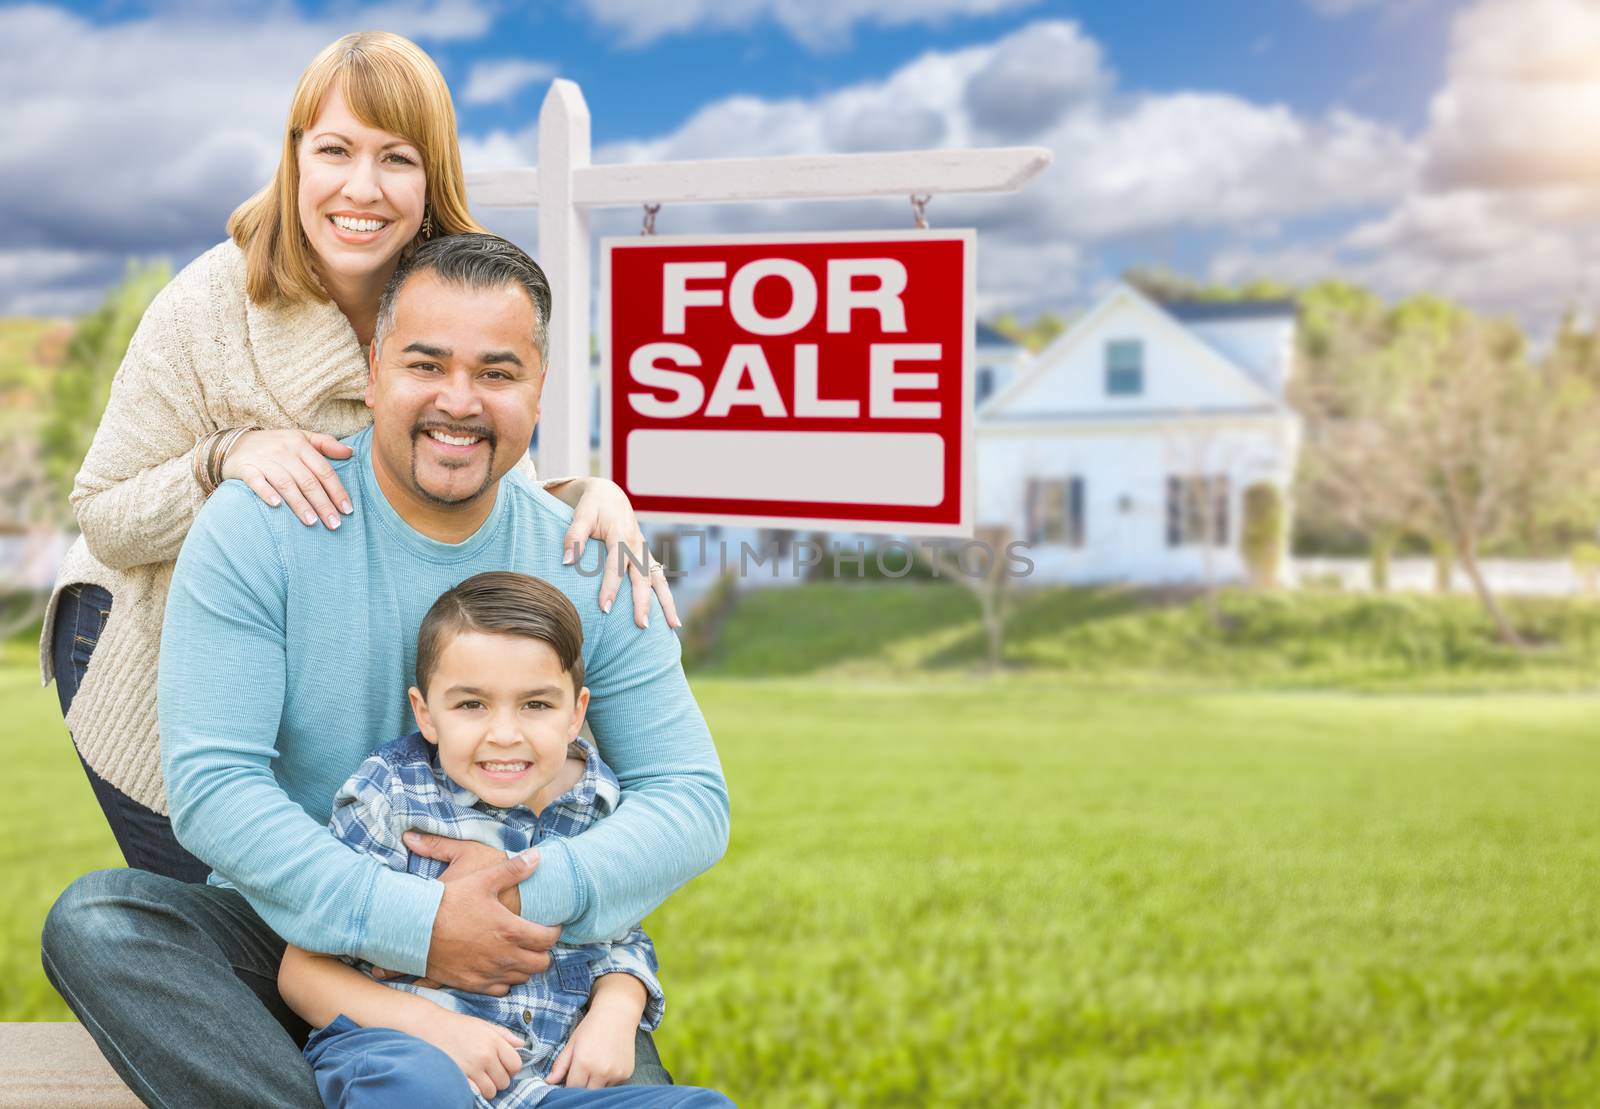 Happy Mixed Race Hispanic and Caucasian Family Portrait In Front of House and Sold For Sale Real Estate Sign.